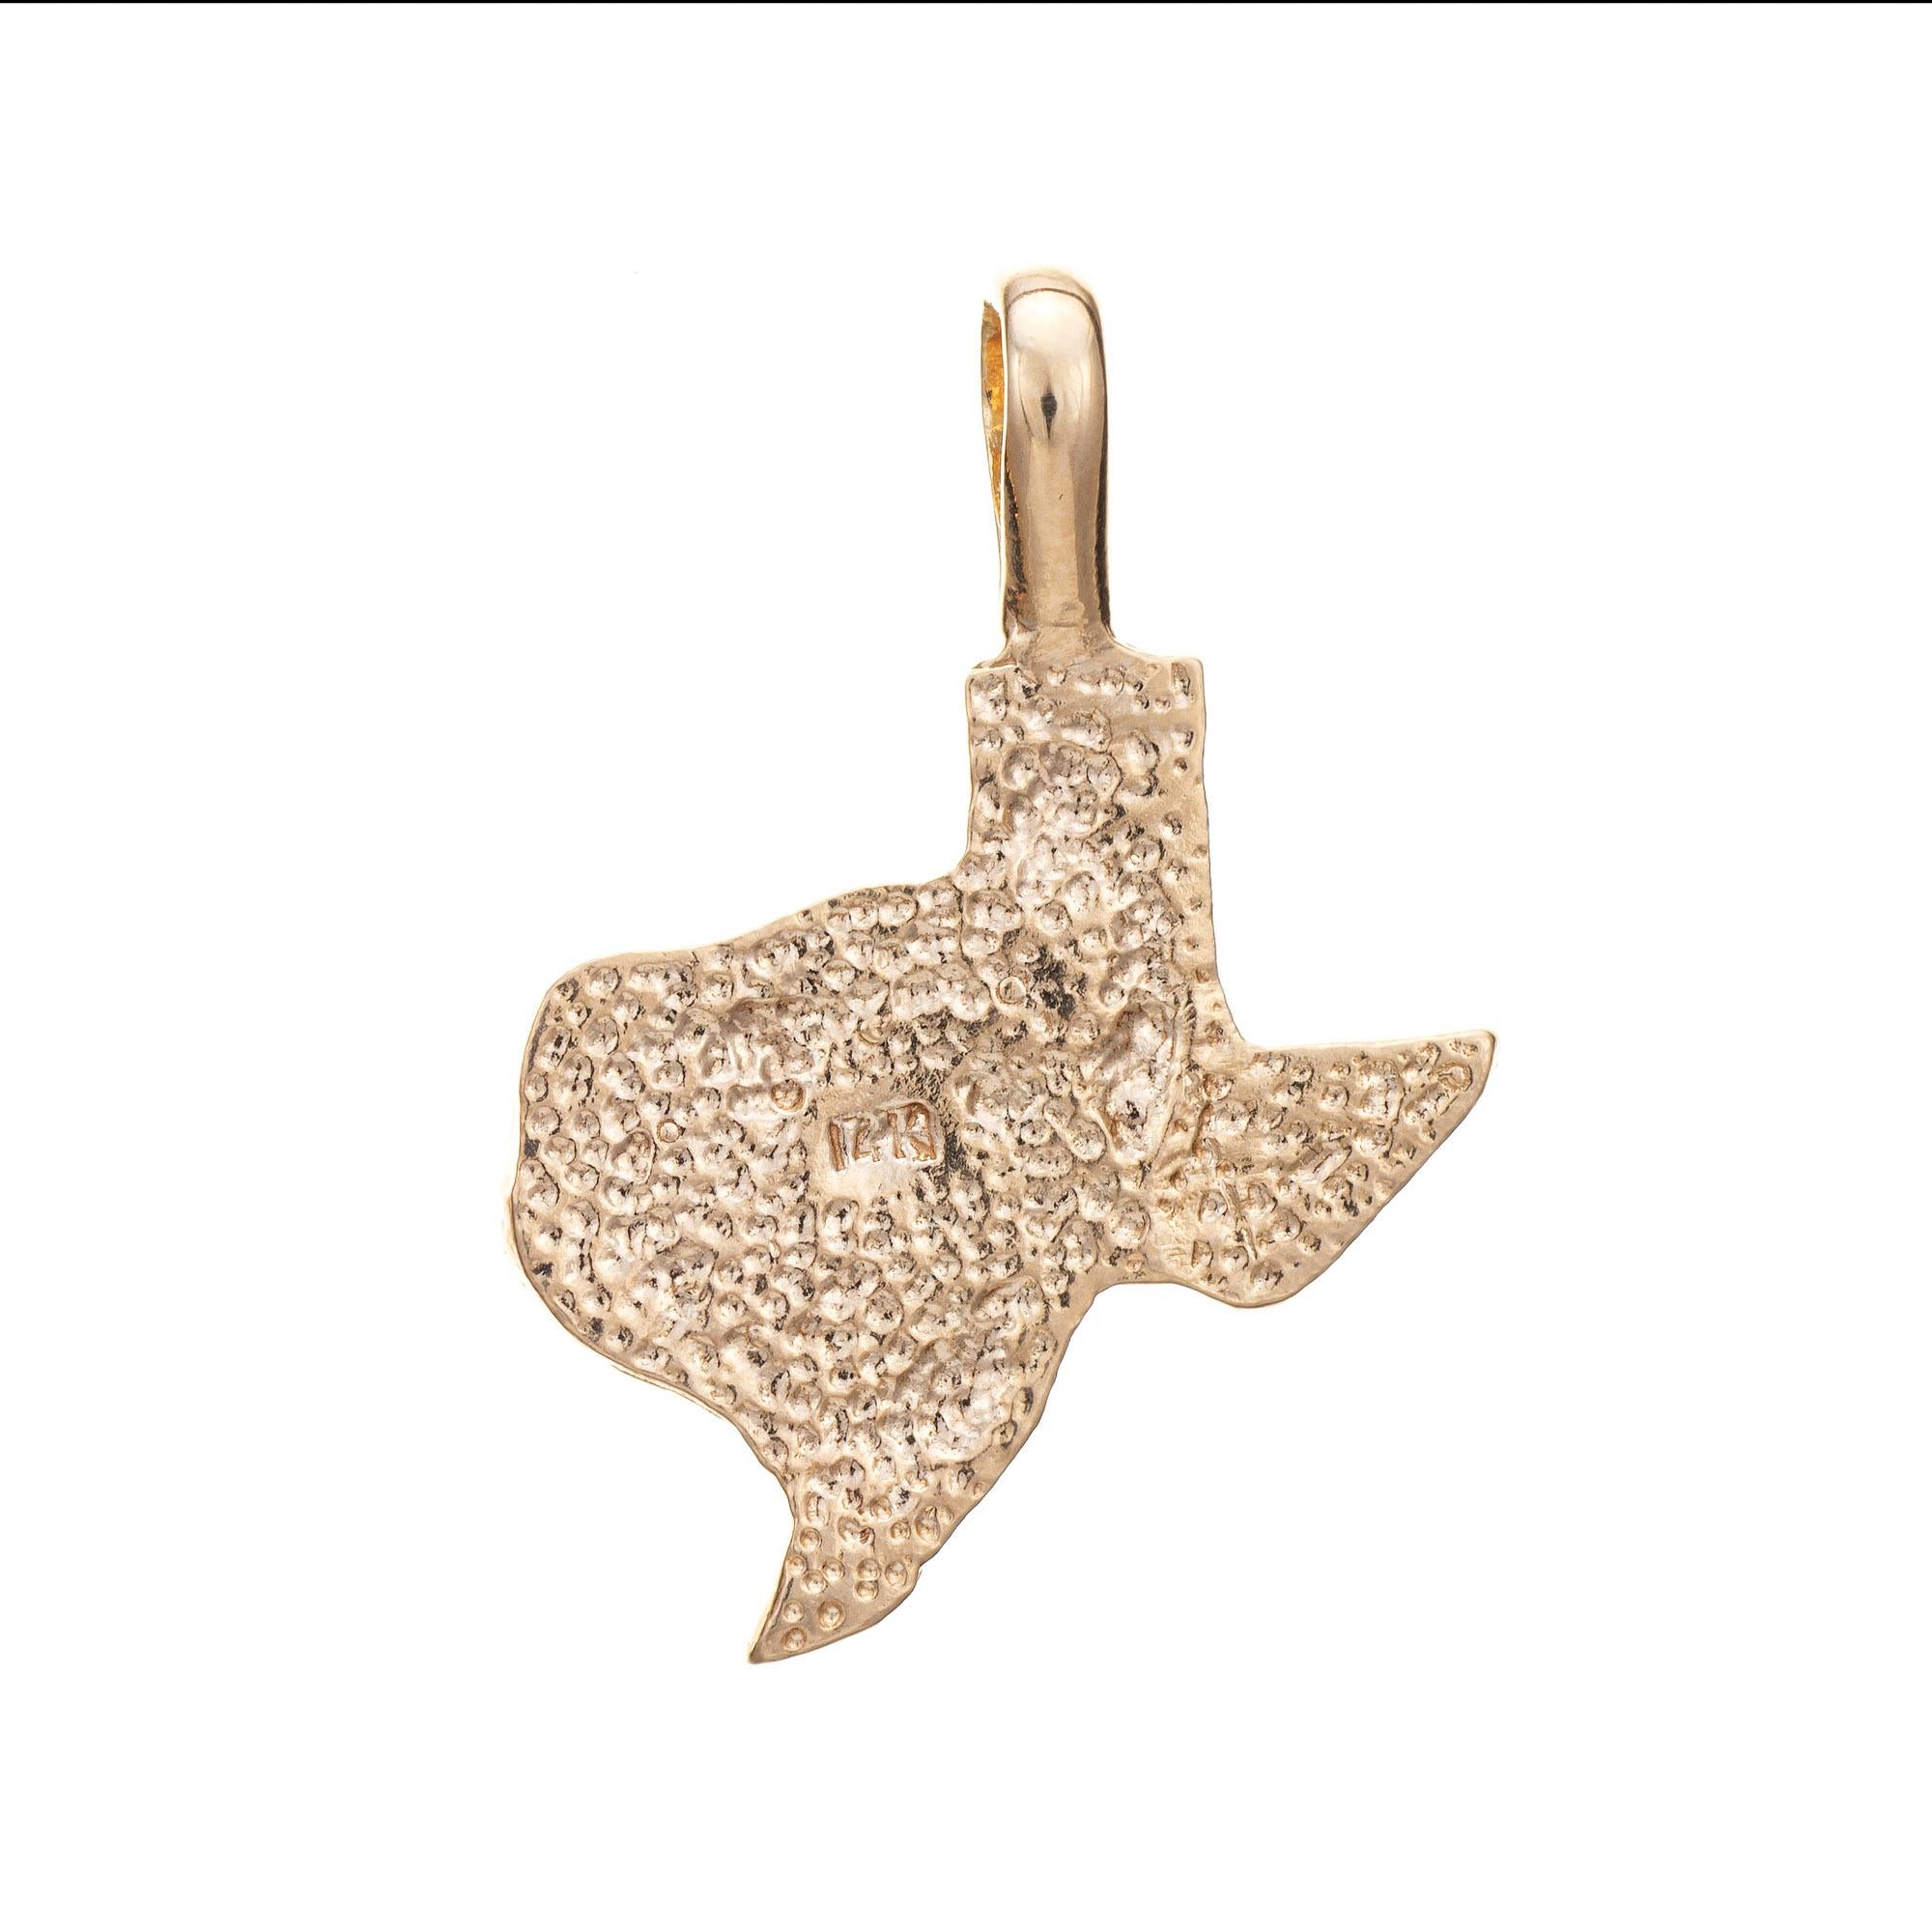 Finely detailed vintage State of Texas charm crafted in 14k yellow gold (circa 1970s).  

The ornate nugget style charm highlights the State of Texas. The piece can be worn as a charm on a bracelet or as a pendant on a chain.

The charm is in very